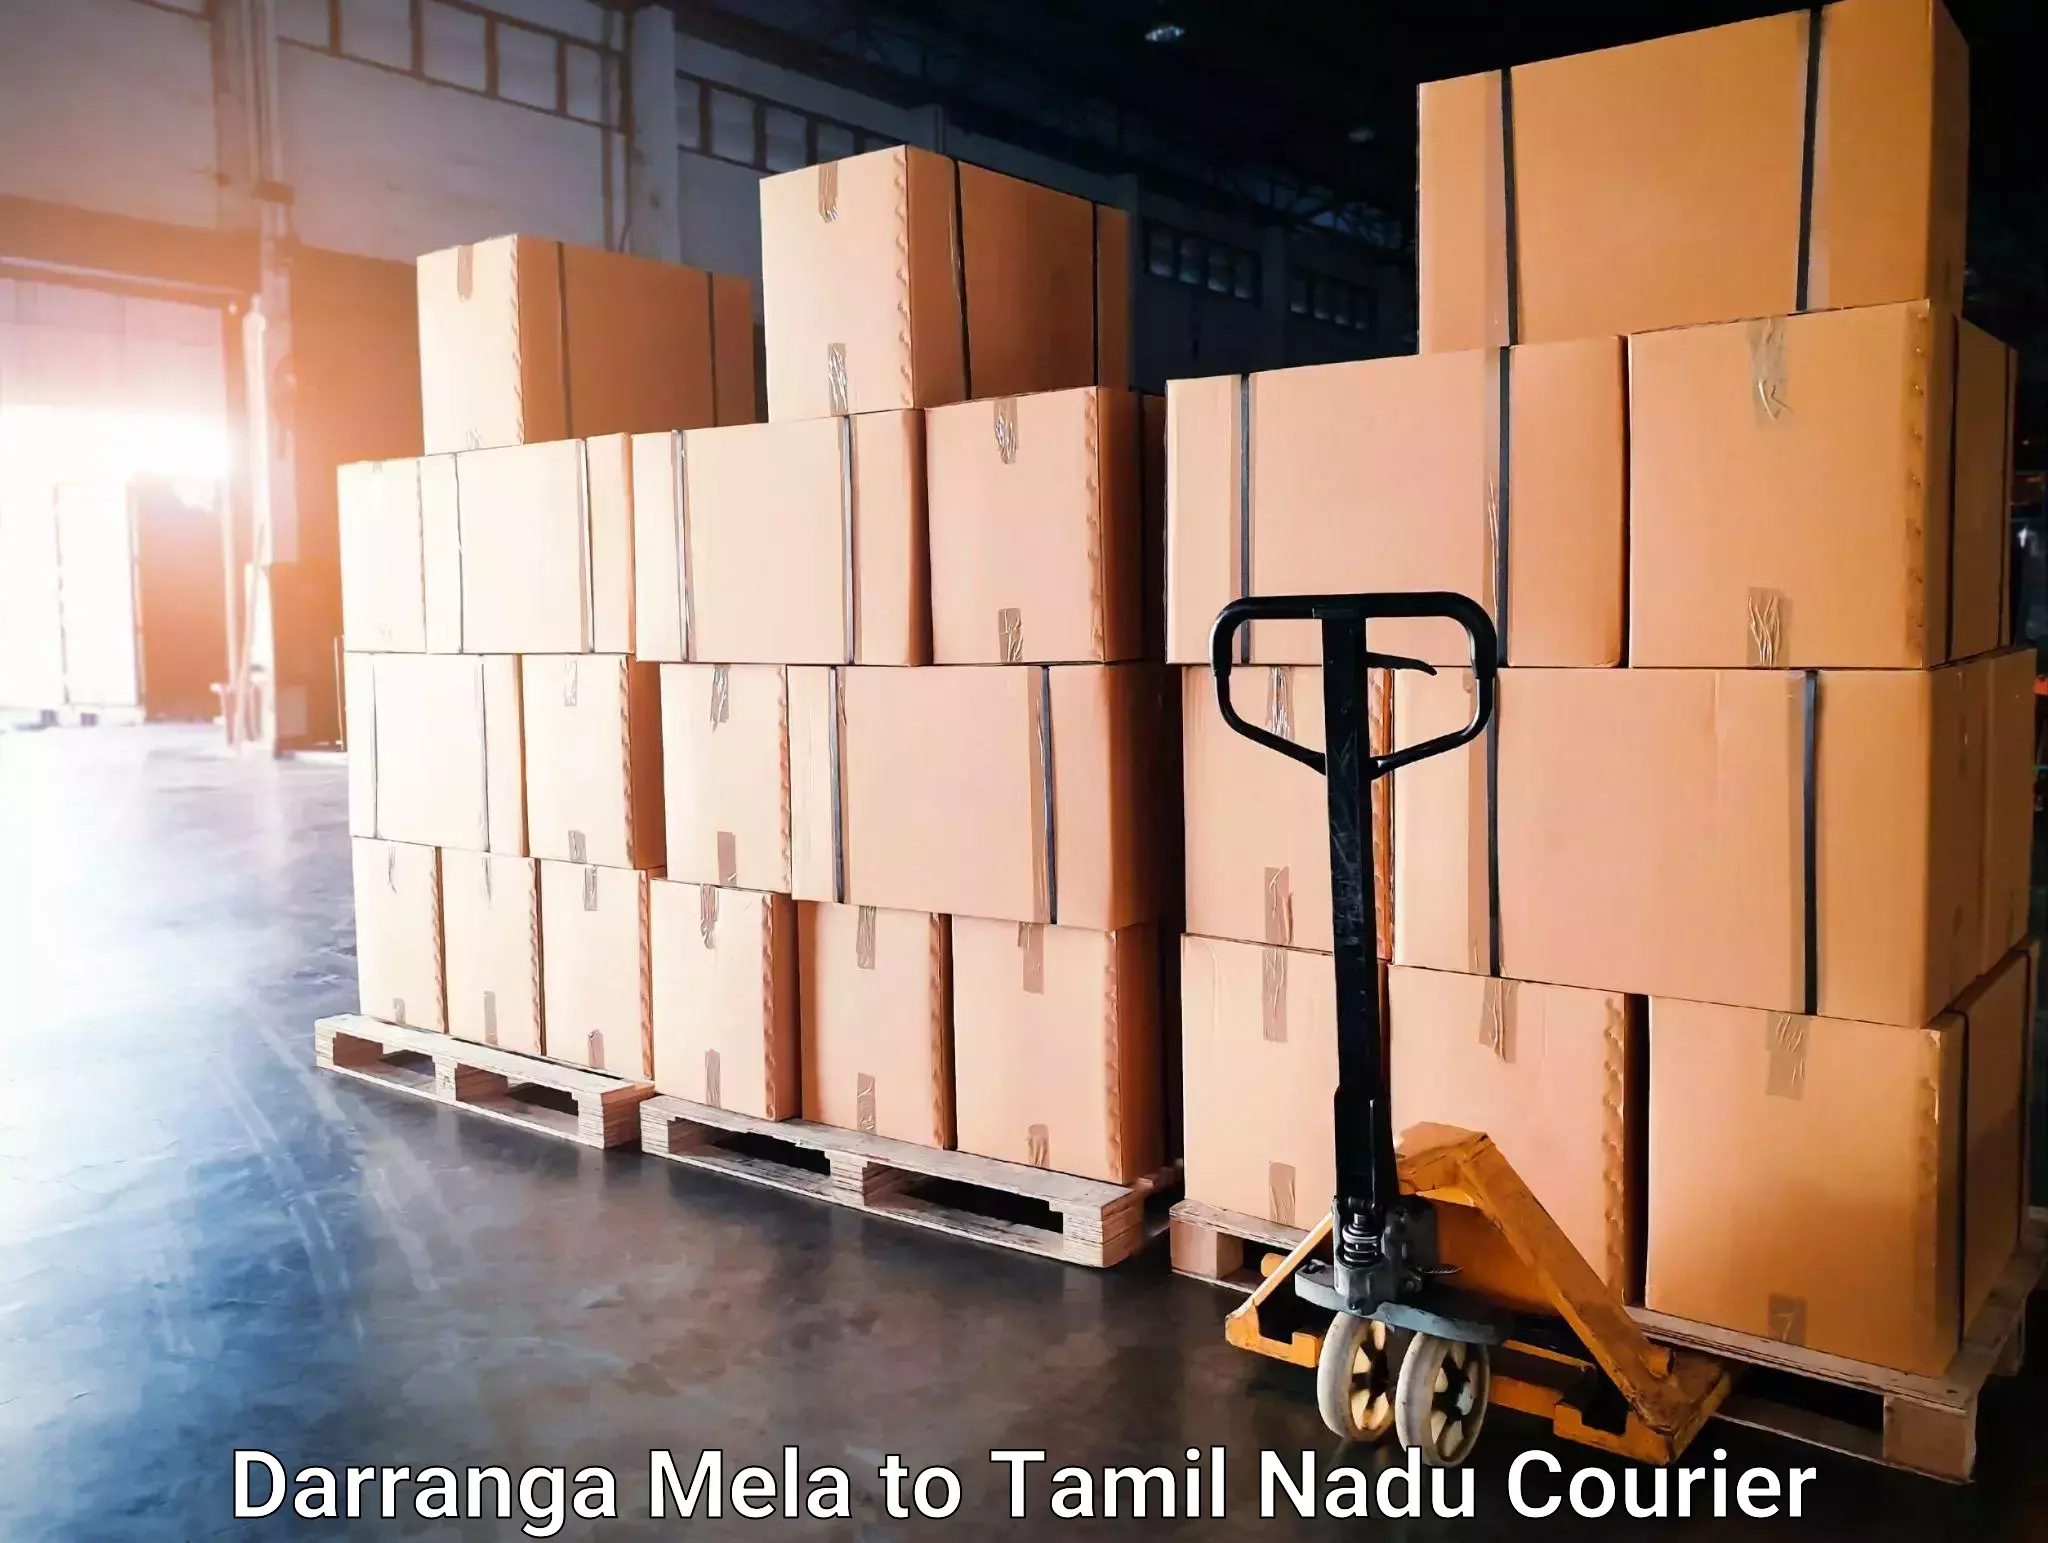 Package delivery network Darranga Mela to Ambattur